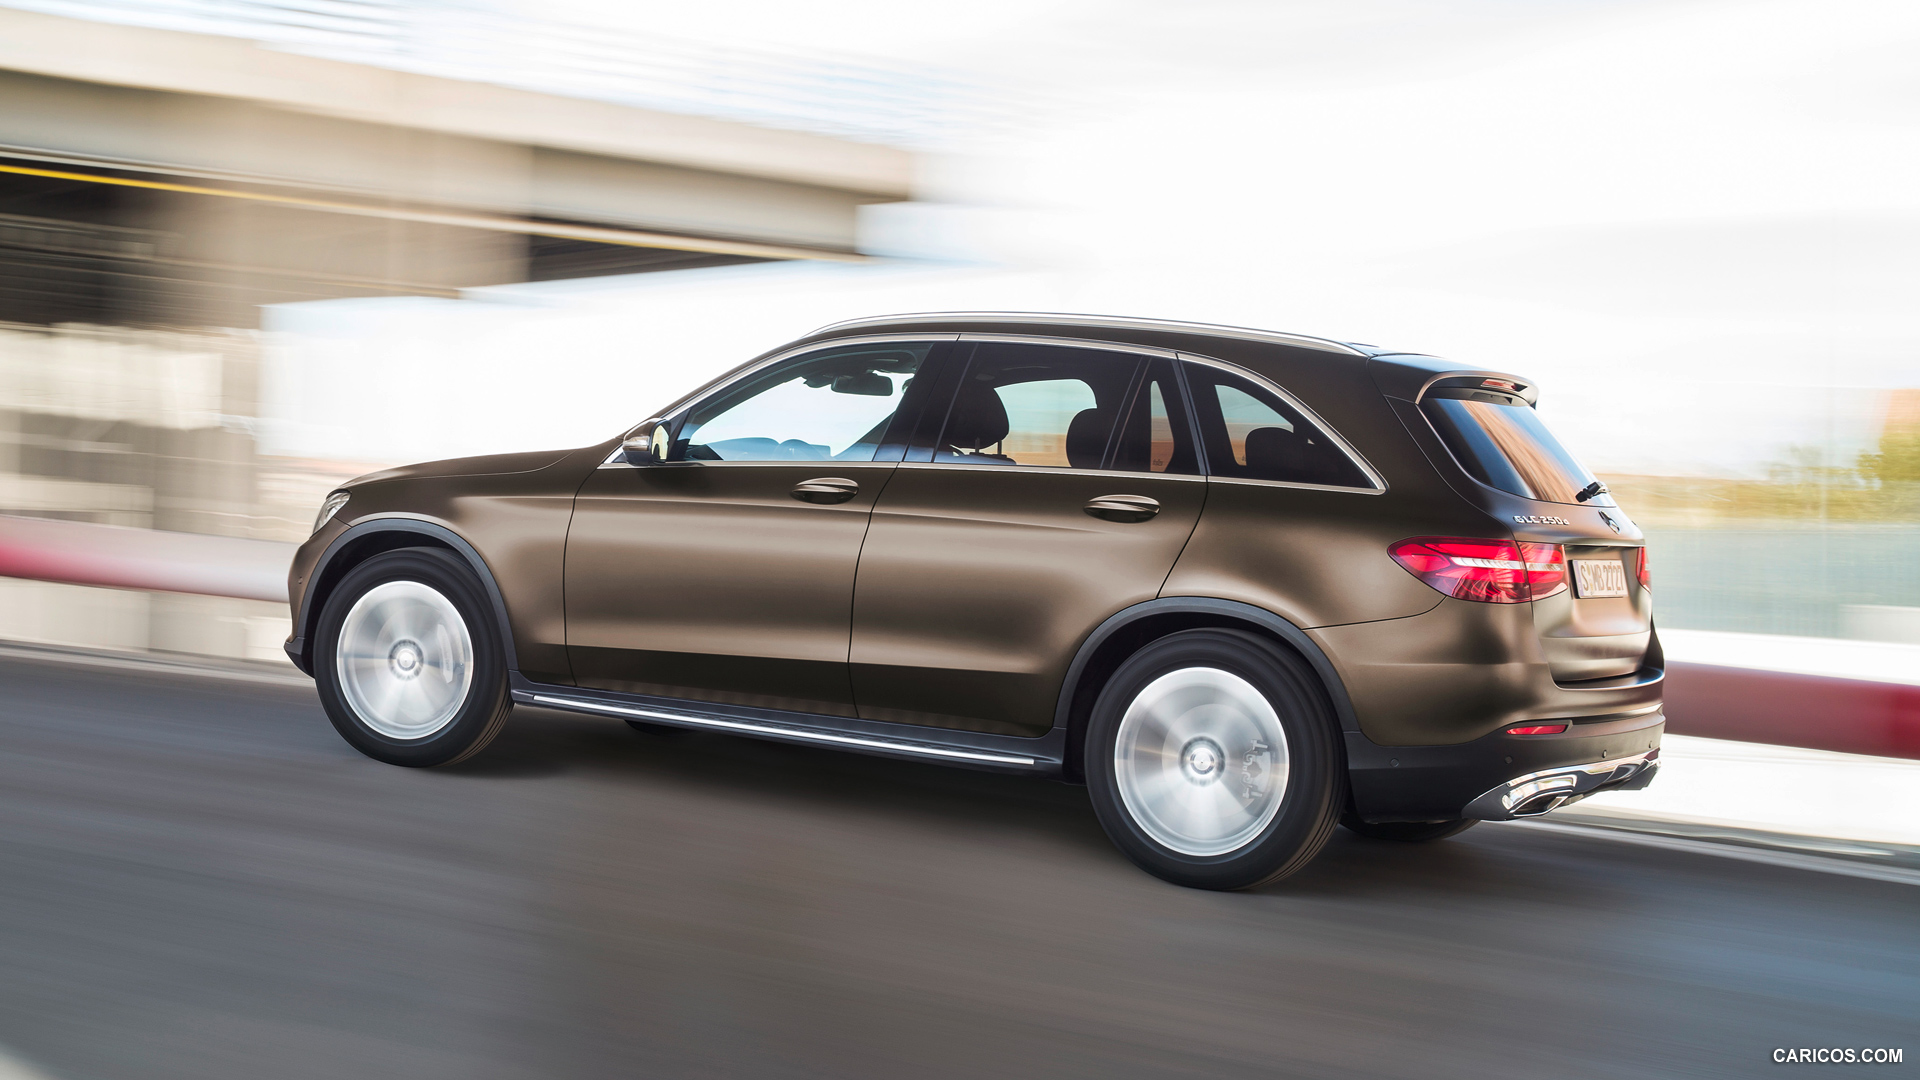 2016 Mercedes-Benz GLC-Class GLC 250d 4MATIC (CITRINE BROWN MAGNO, Offroad Line) - Side, #55 of 254